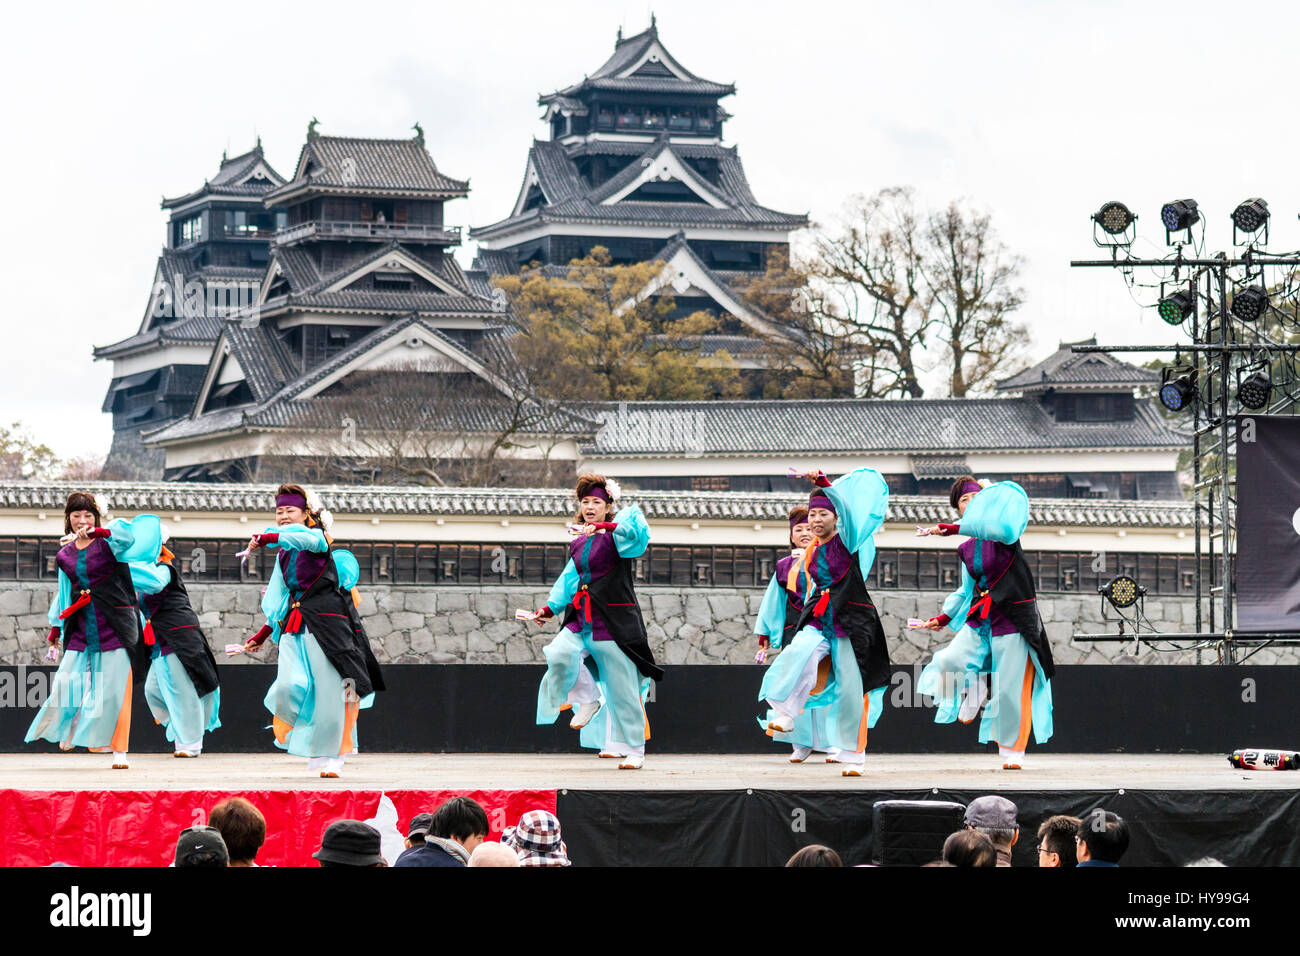 Hinokuni Yosakoi Dance Festival in Japan. team of mature women dancing on stage in black and turquoise costume with Kumamoto castle in background. Stock Photo